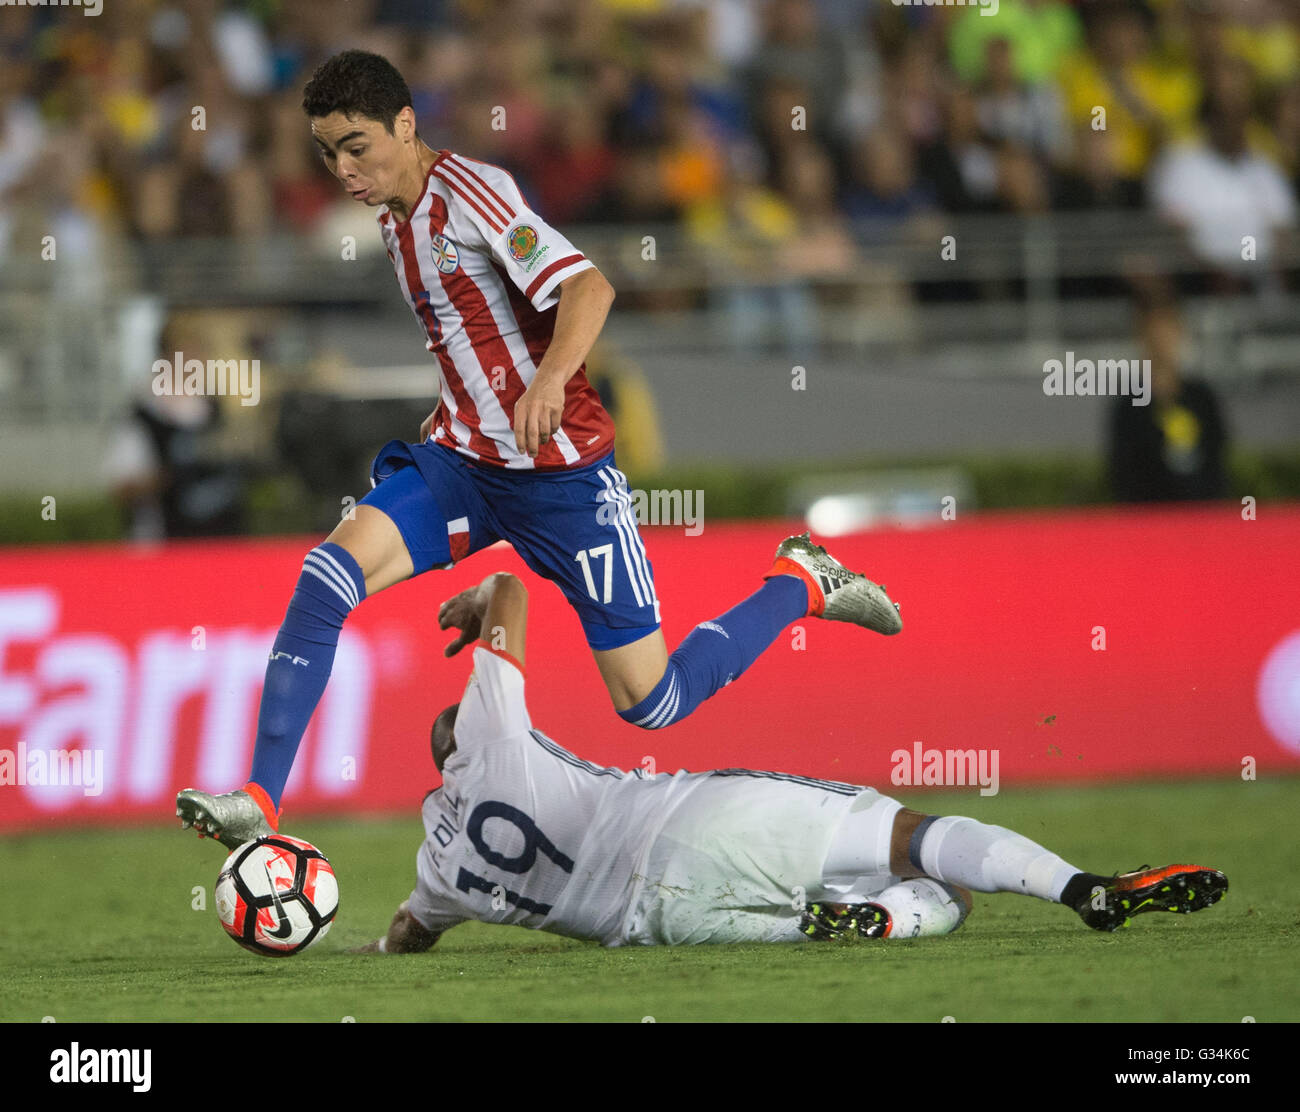 Pasadena, USA. 7th June, 2016. Paraguay's Miguel Almiron (top) breaks through during the Copa America Centenario Group A match between Colombia and Paraguay at Rose Bowl Stadium in Pasadena, California, the United States, June 7, 2016. © Yang Lei/Xinhua/Alamy Live News Stock Photo